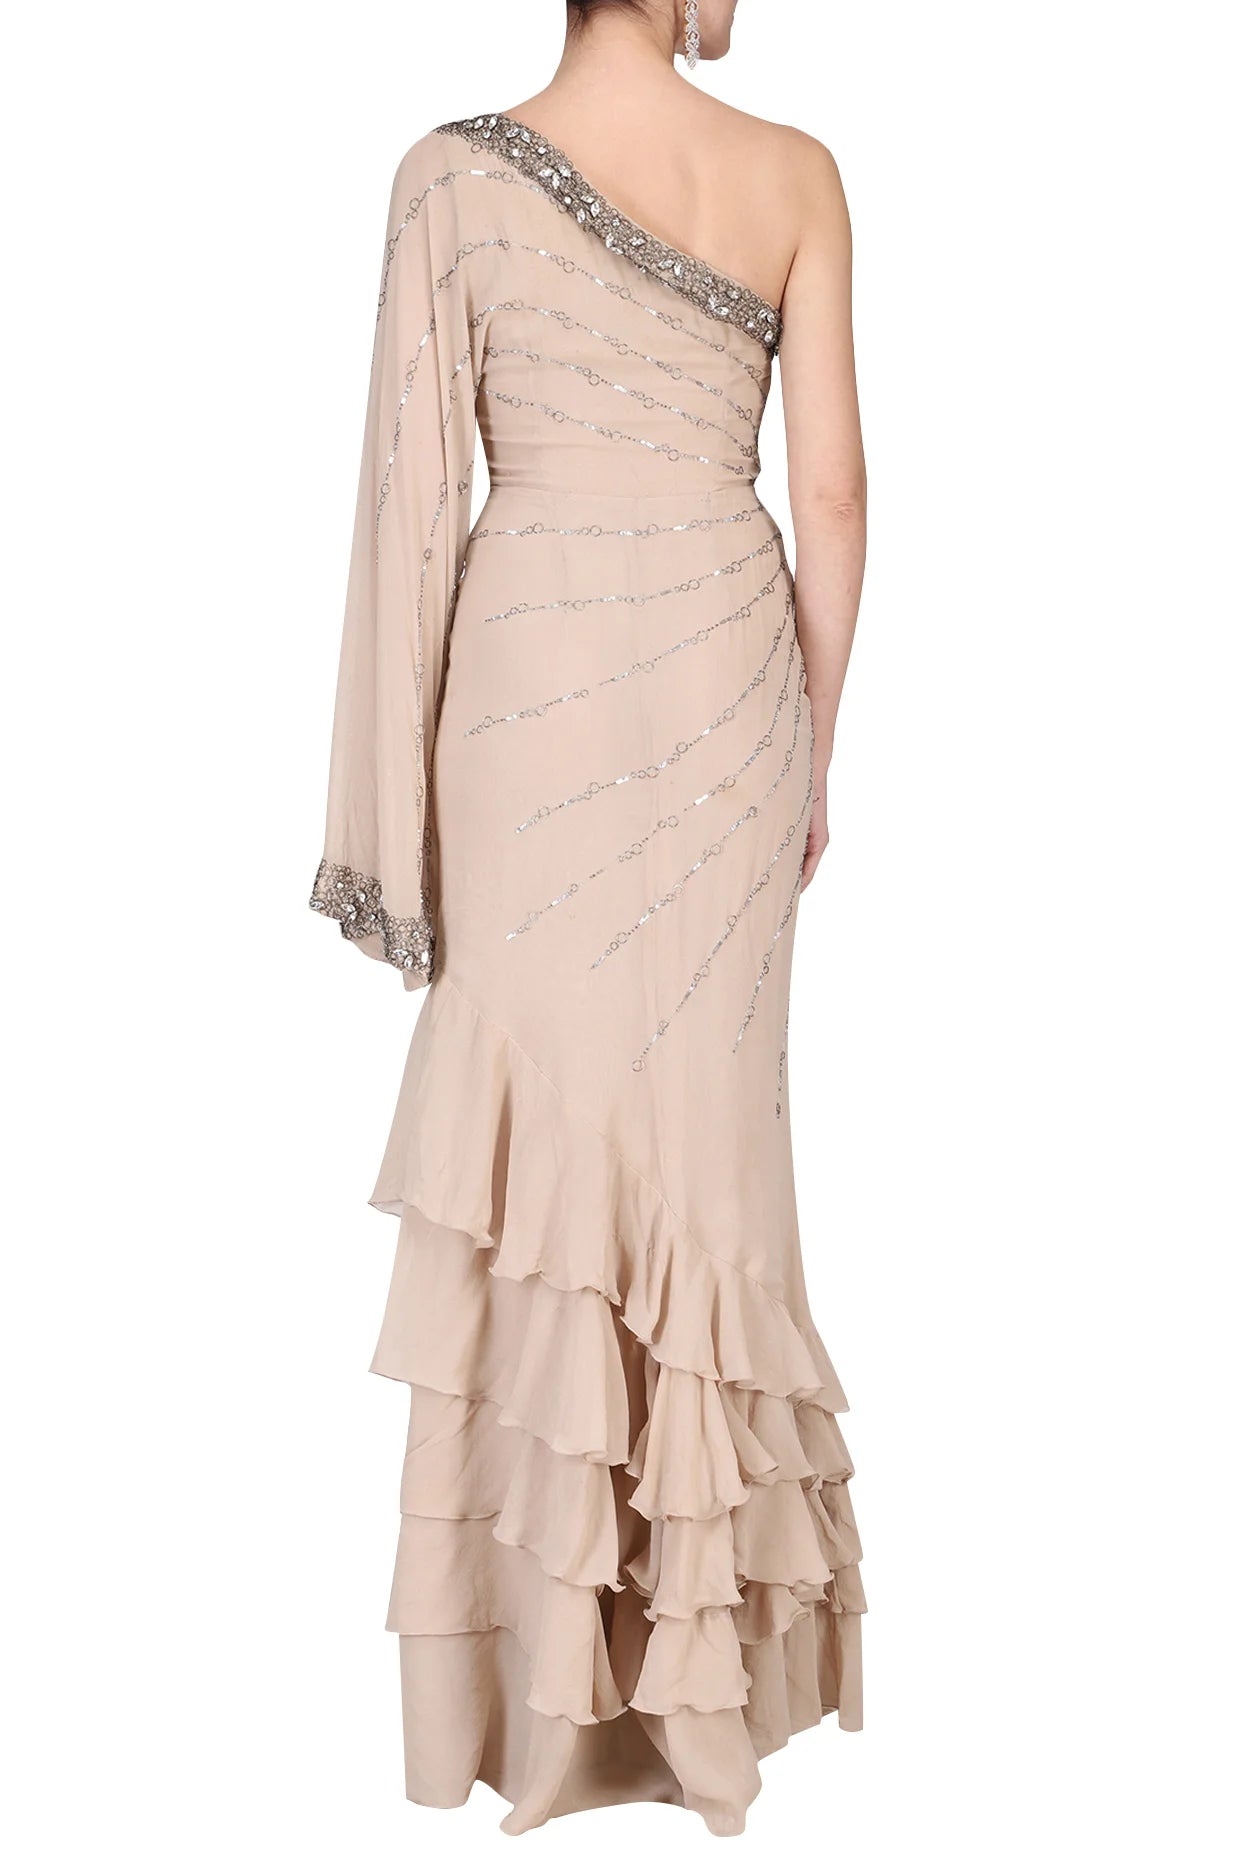 Beige Saree Gown With One Shoulder Drape Moroccan Inspiration Silk Chiffon Saree Gown